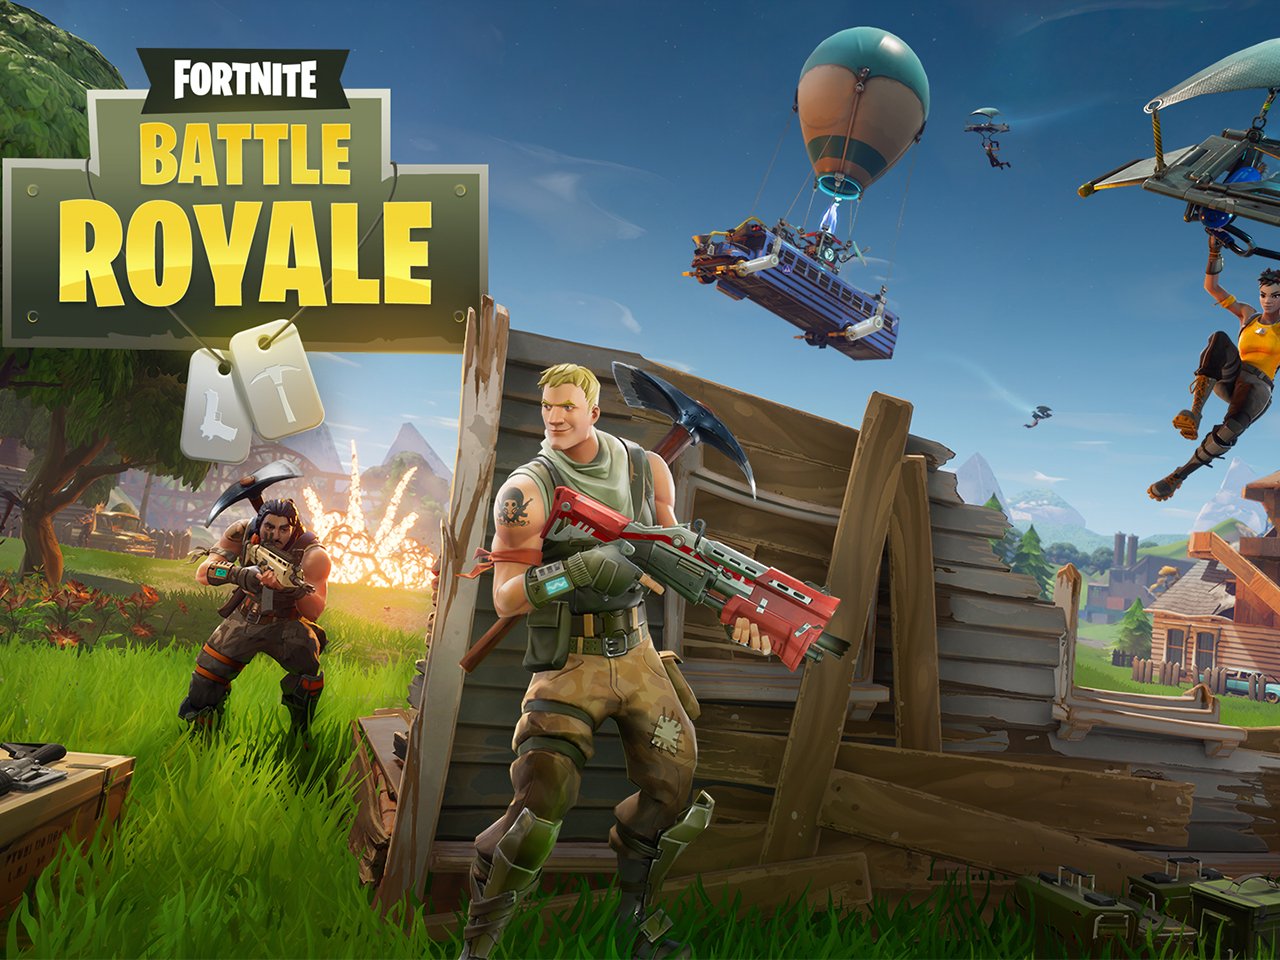 What Parents Need To Know About The Video Game Fortnite